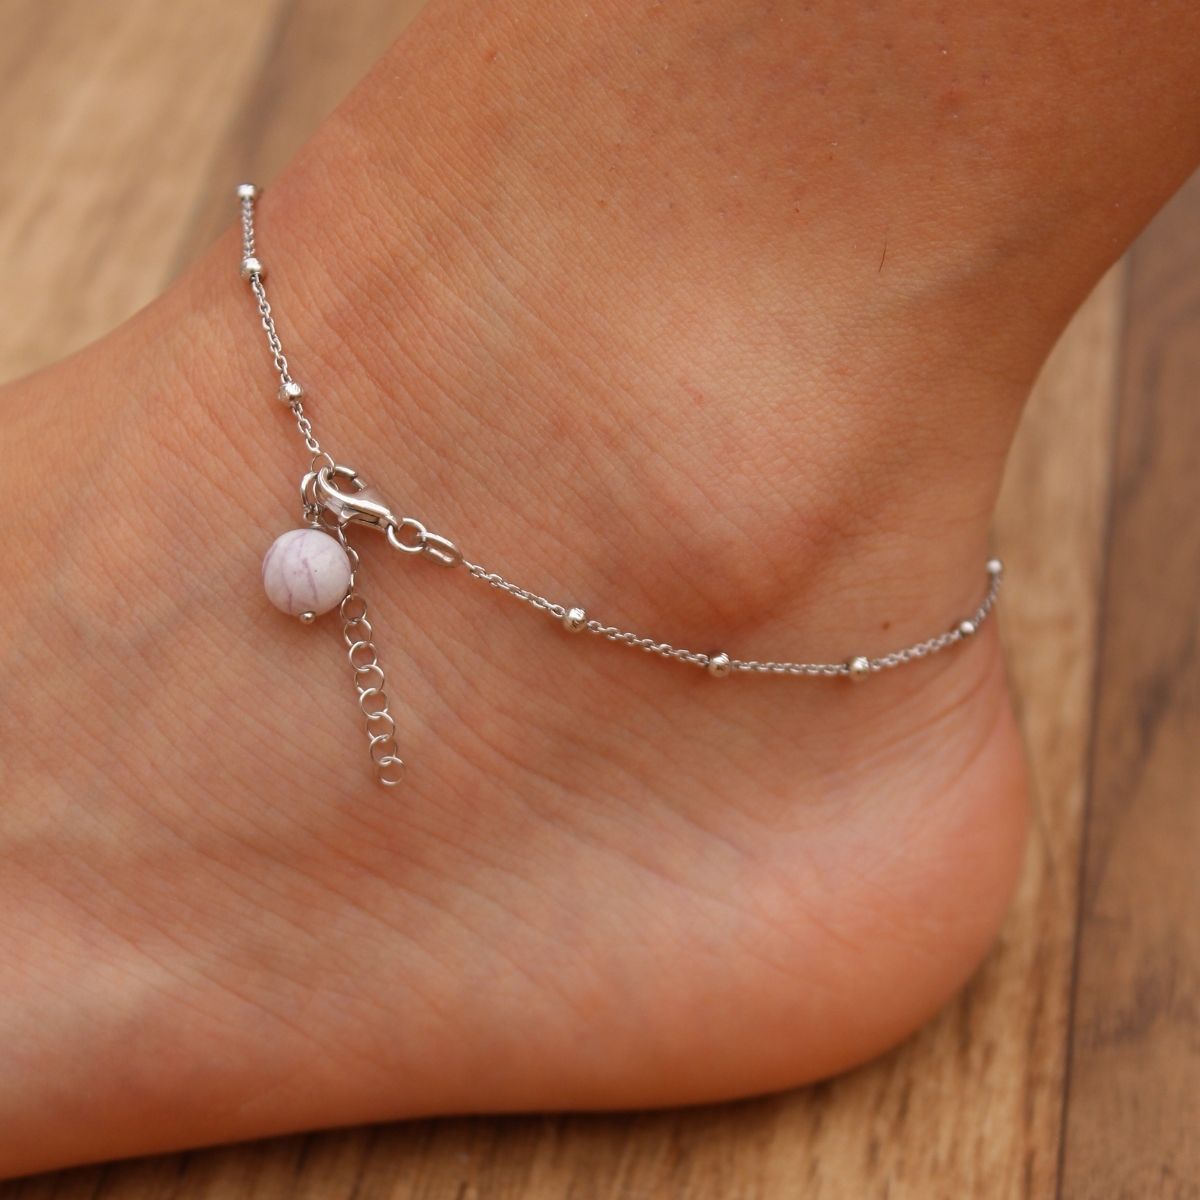 SILVER ANKLET WITH AGATE